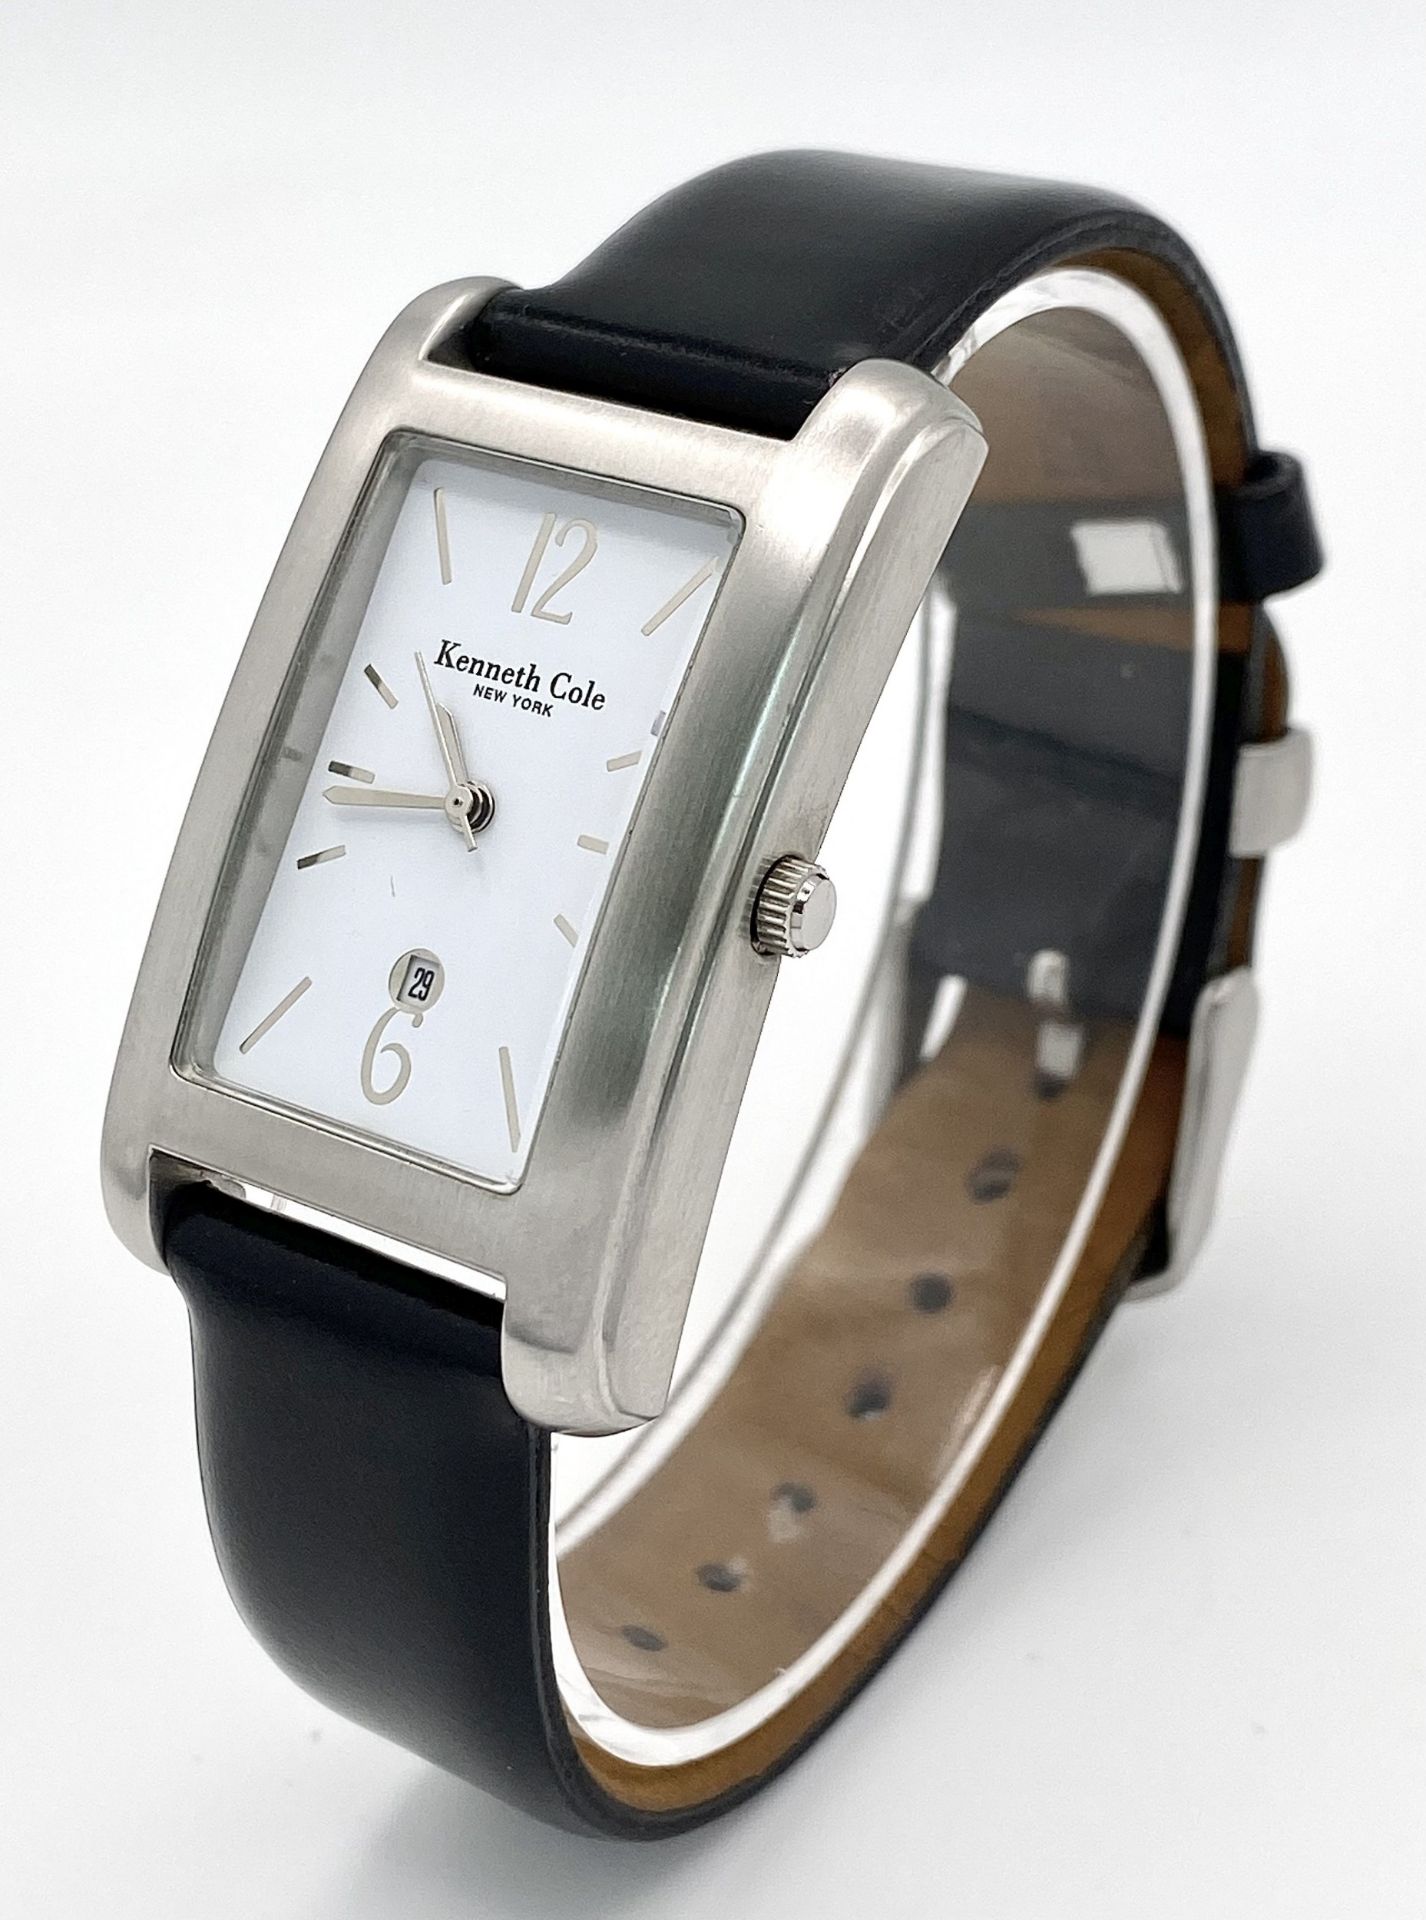 A Kenneth Cole New York Tank Style Quartz Date Watch. 26mm Case. Full Working Order. Comes with